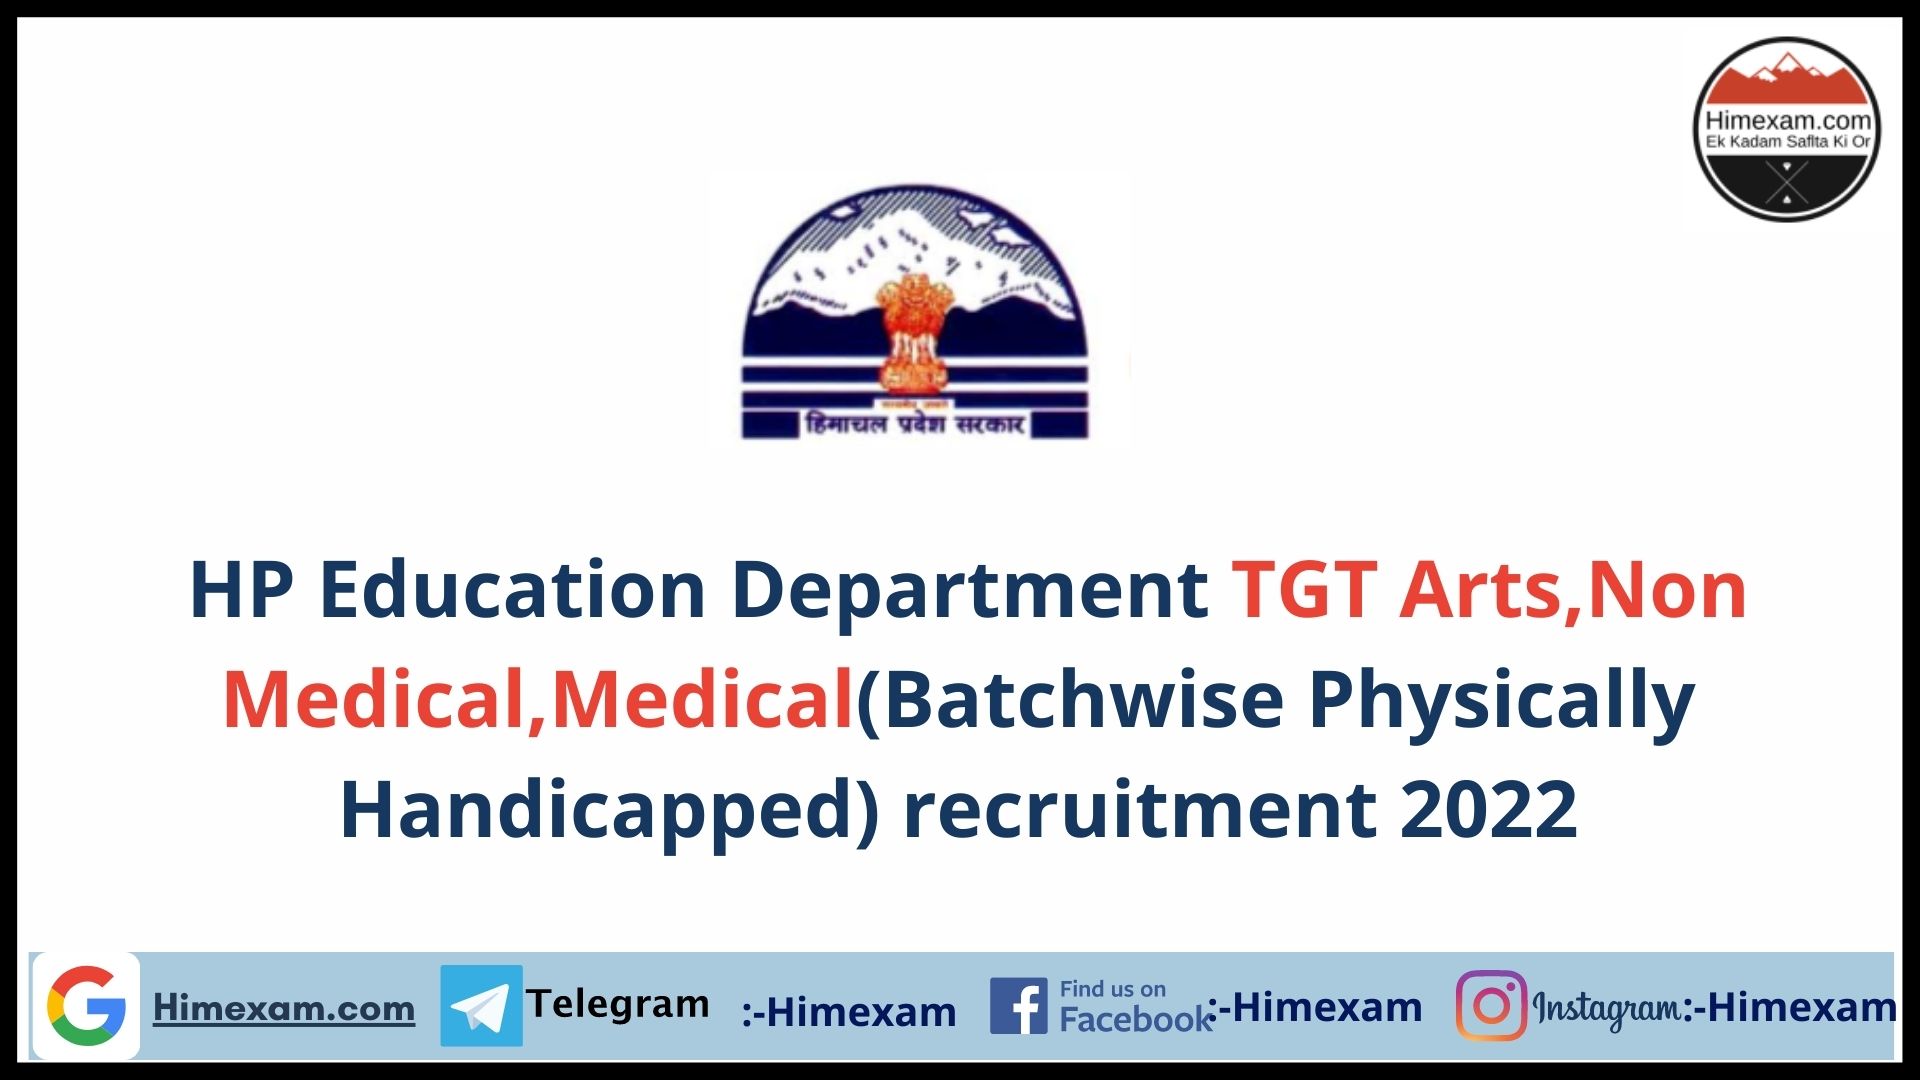 HP Education Department TGT Arts,Non Medical,Medical(for Physically Handicapped) recruitment 2022